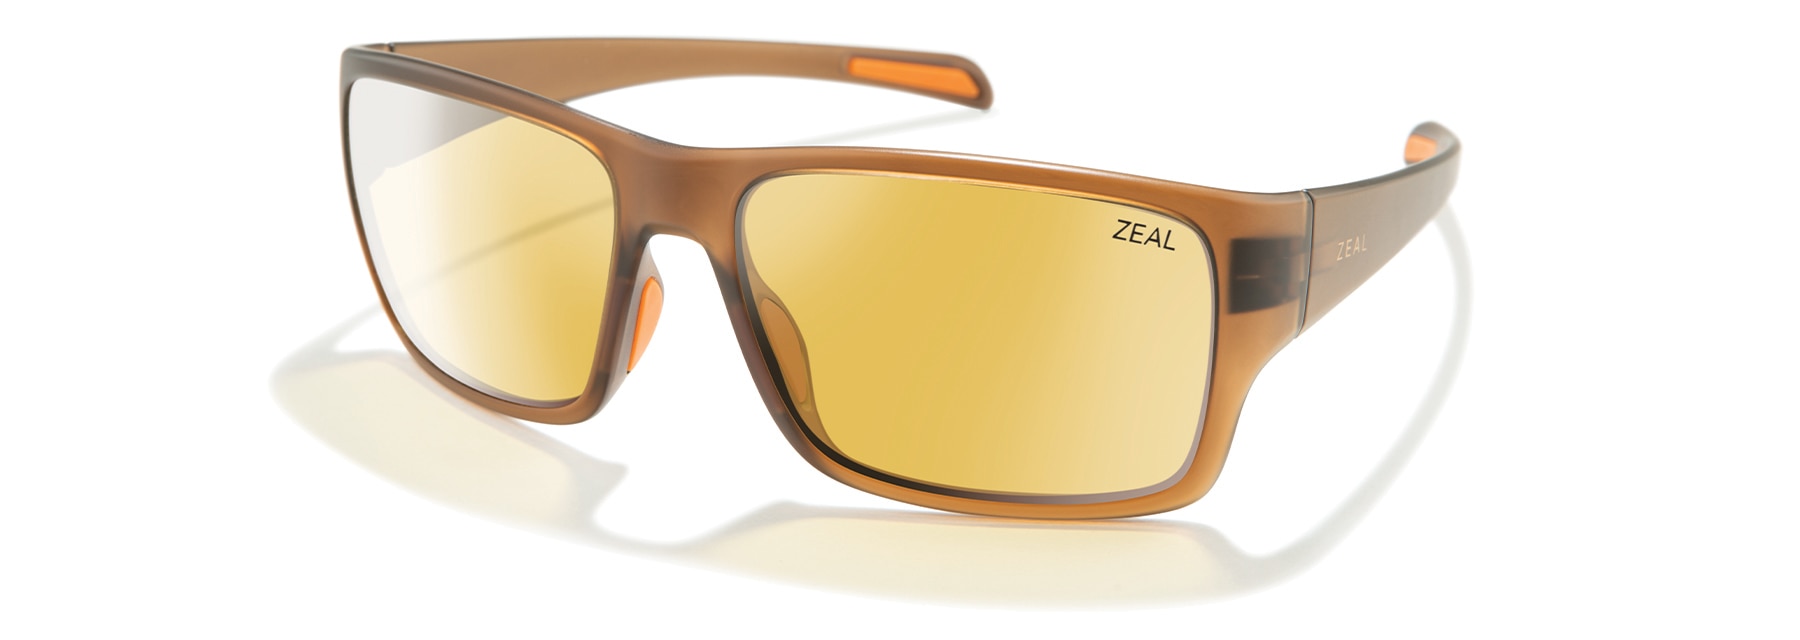 Shop MANITOU (Z1661) Sunglasses by Zeal | Zeal Optics